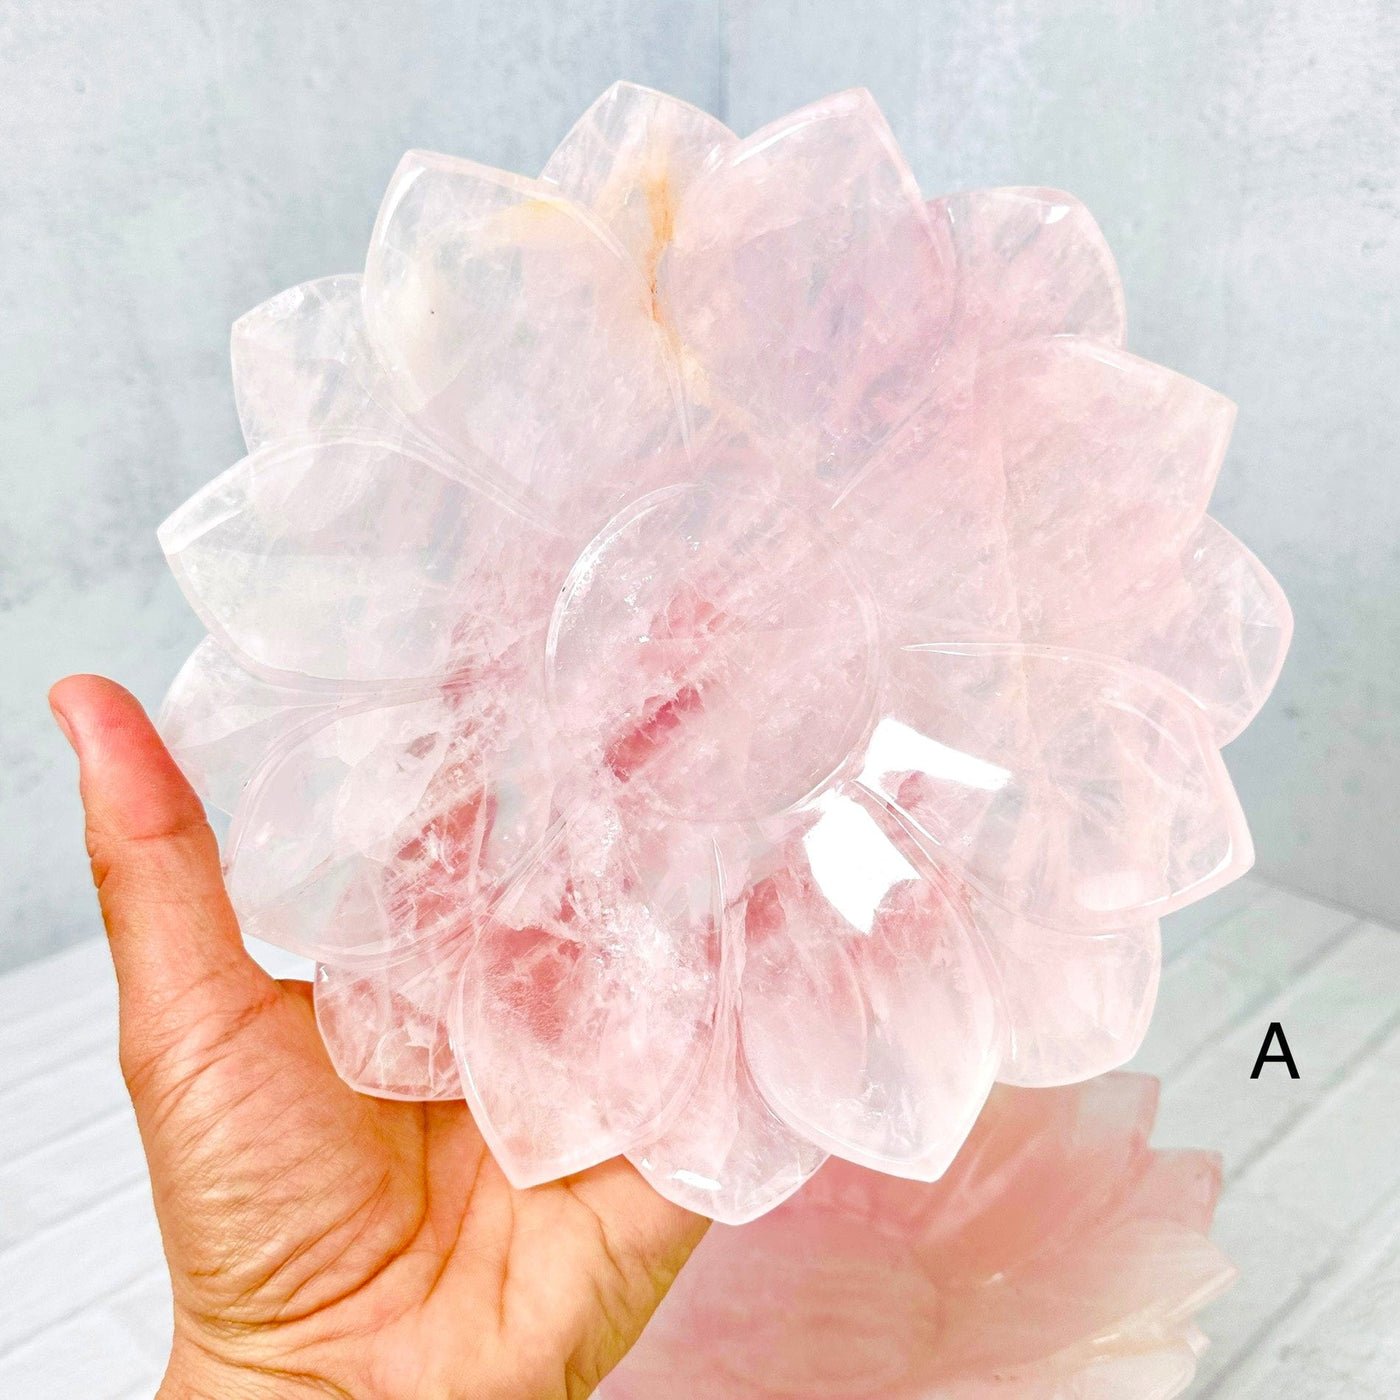 Rose Quartz Lotus Bowl A held up in woman's hand.